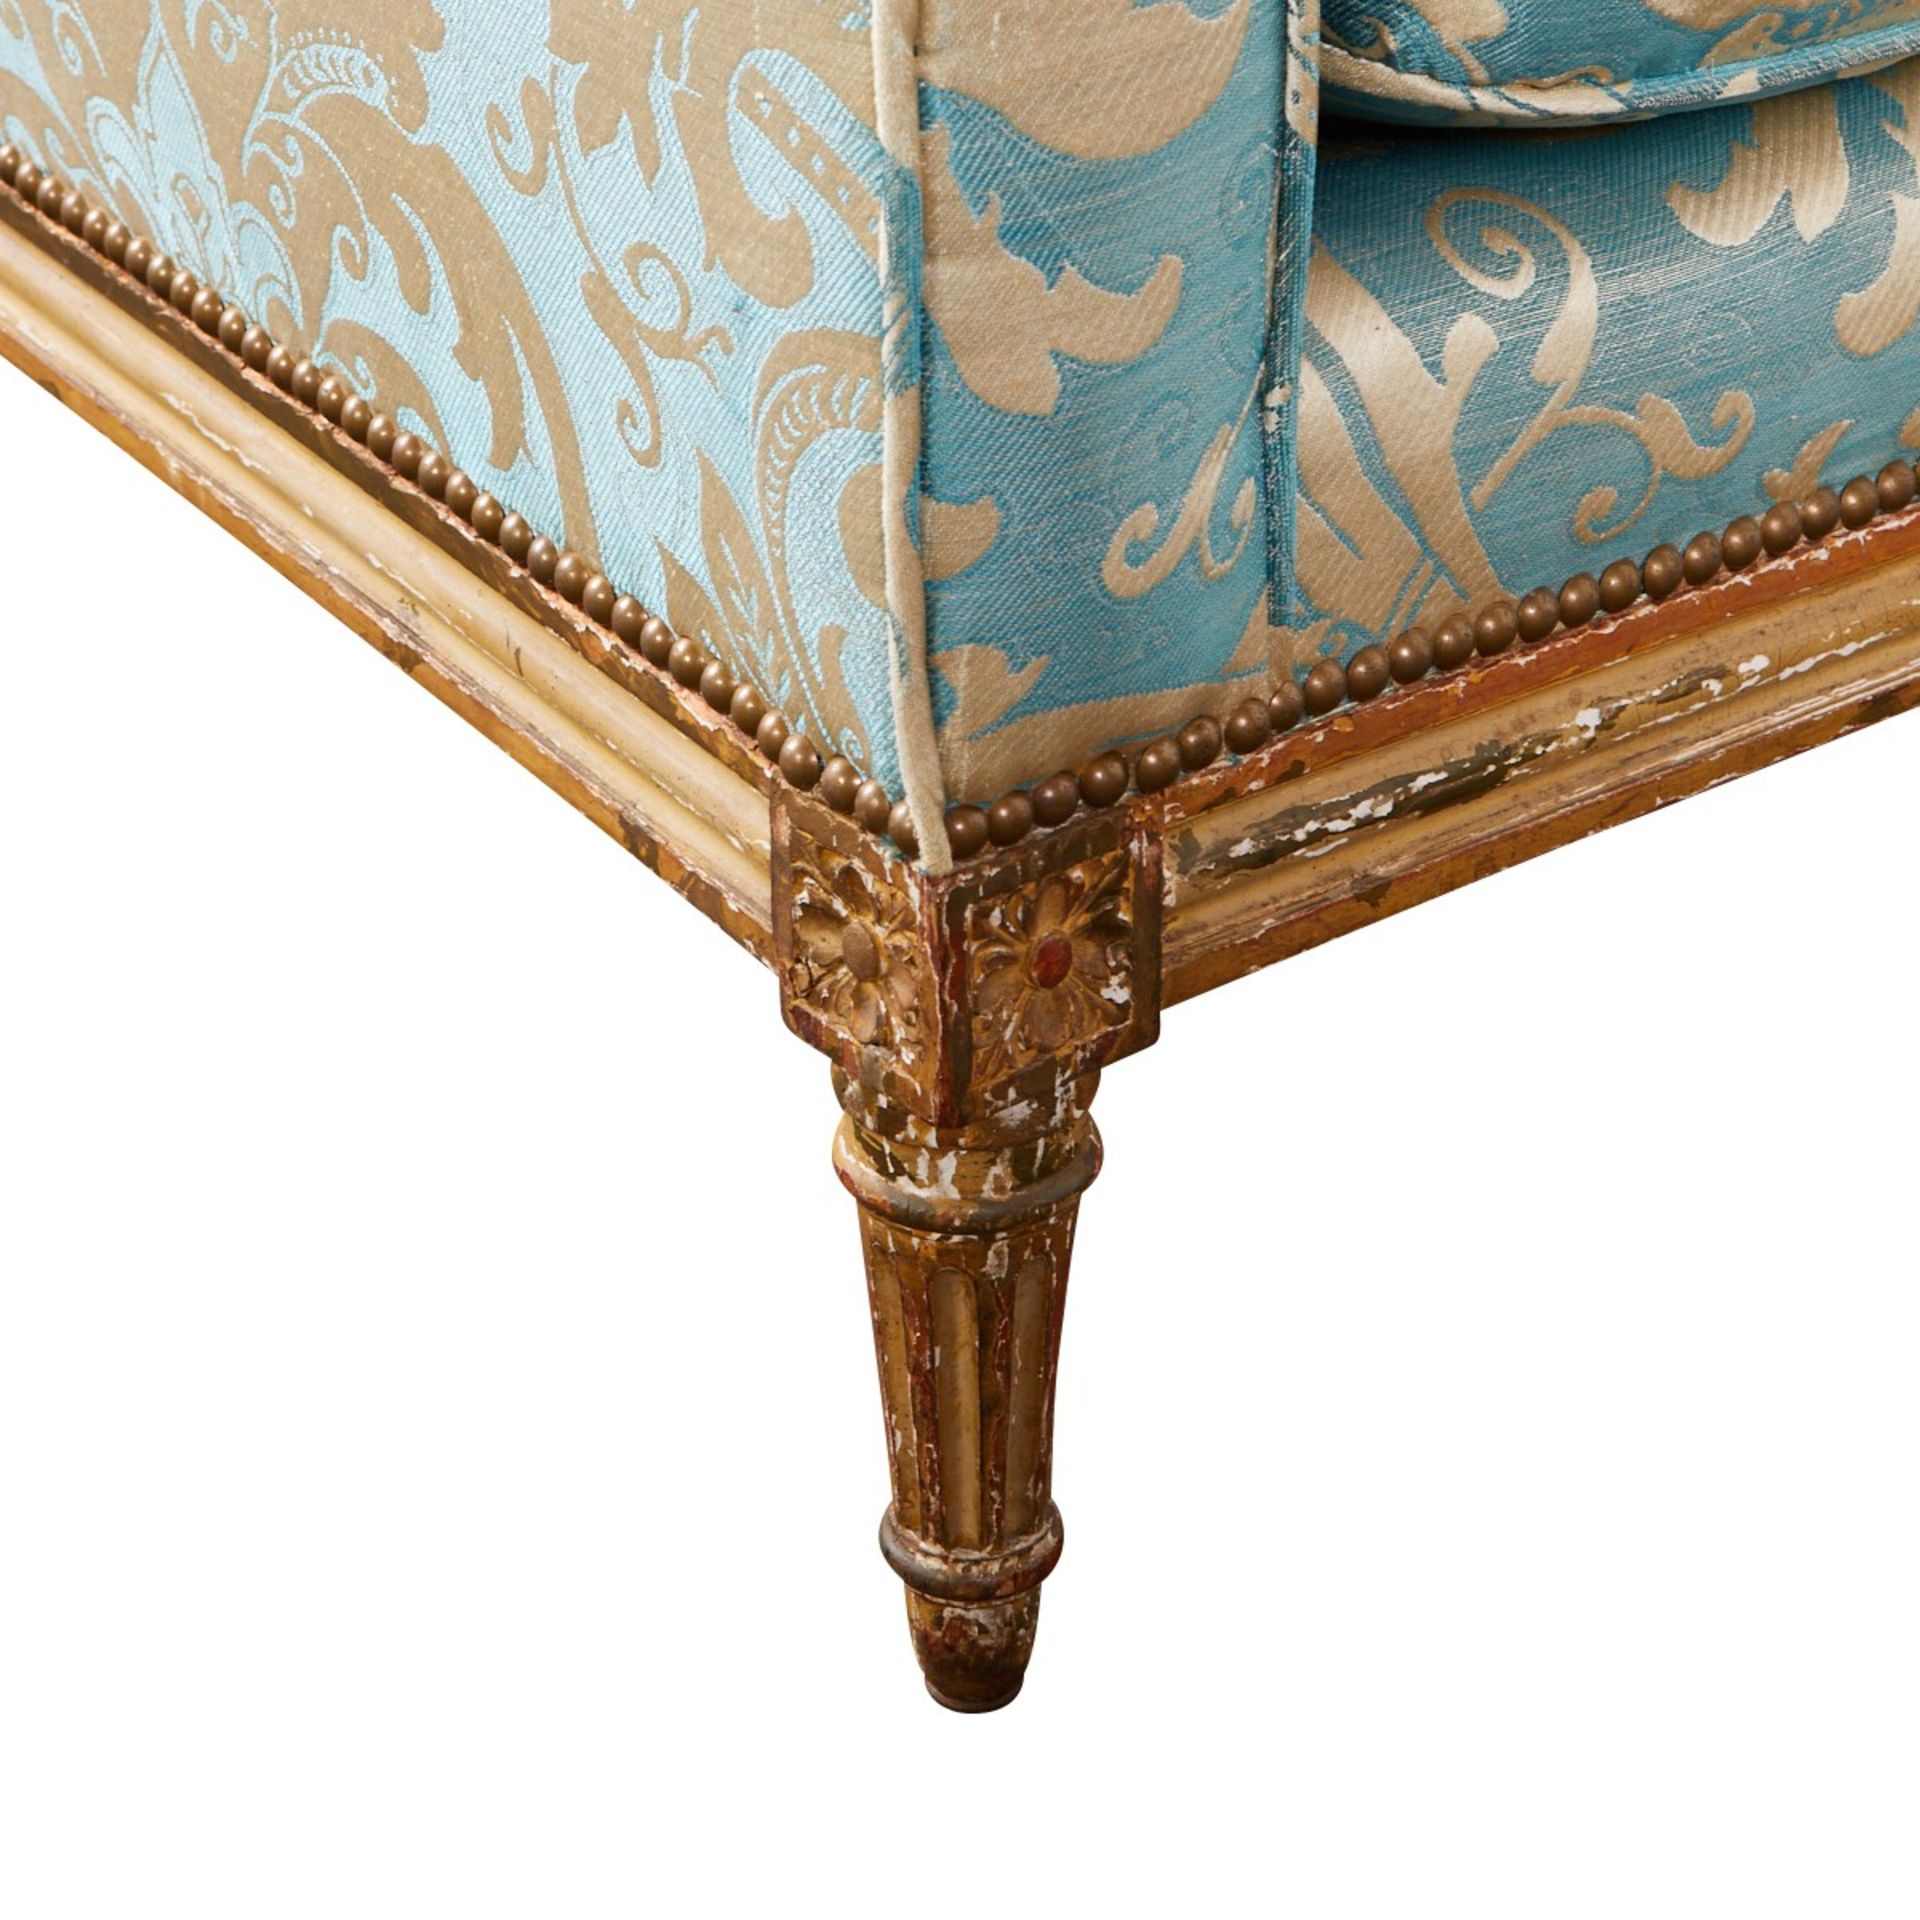 French Upholstered Giltwood Loveseat or Settee - Image 13 of 13